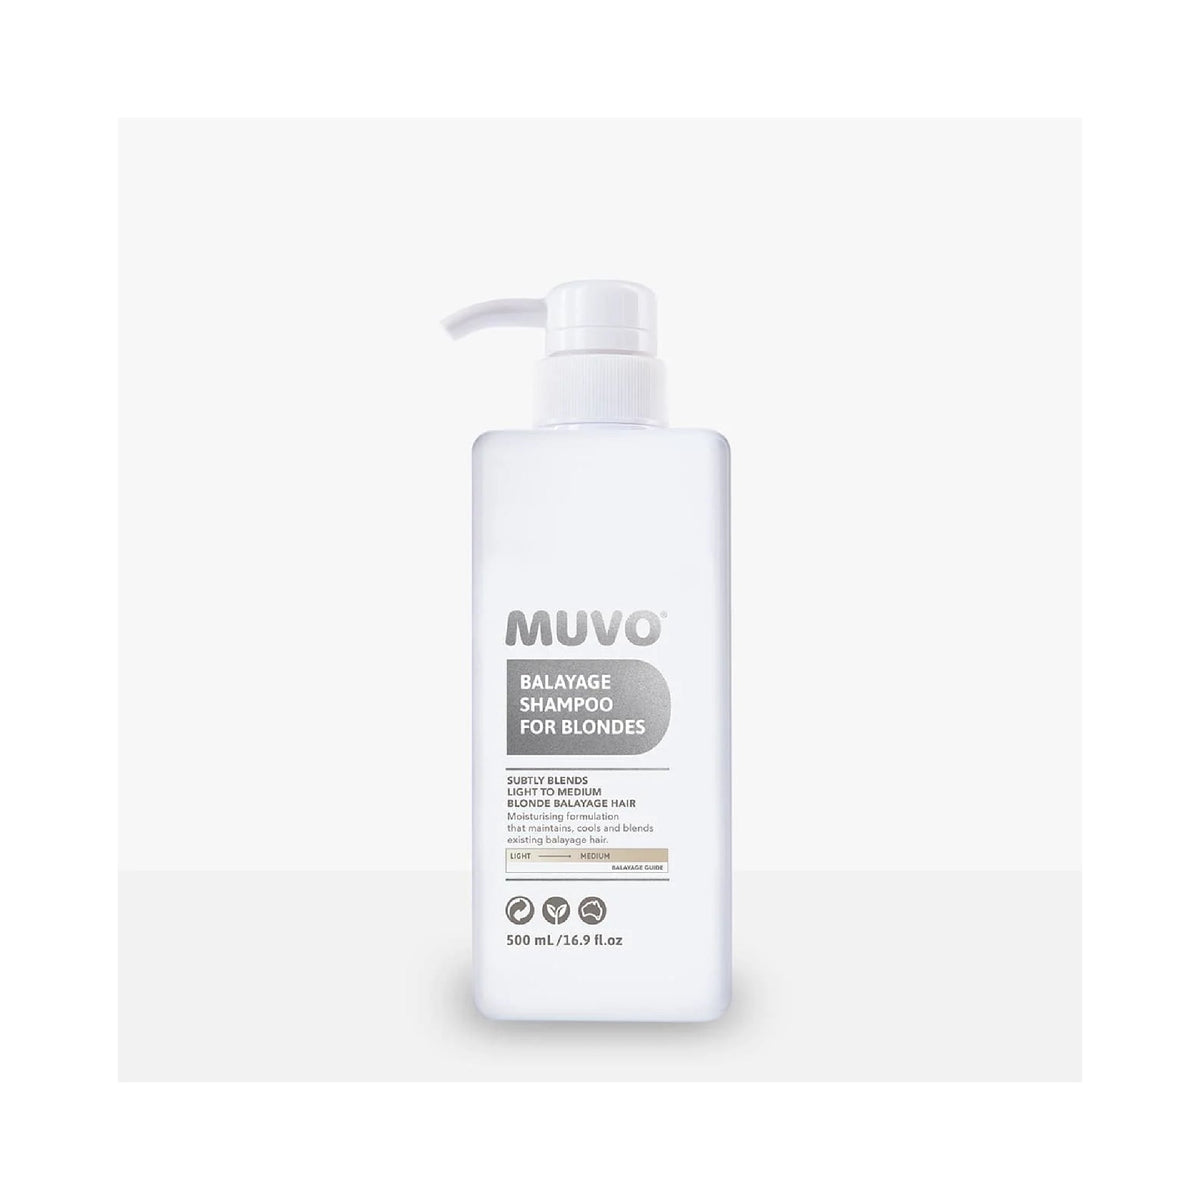 Muvo Balayage Shampoo For Blondes - Haircare Superstore